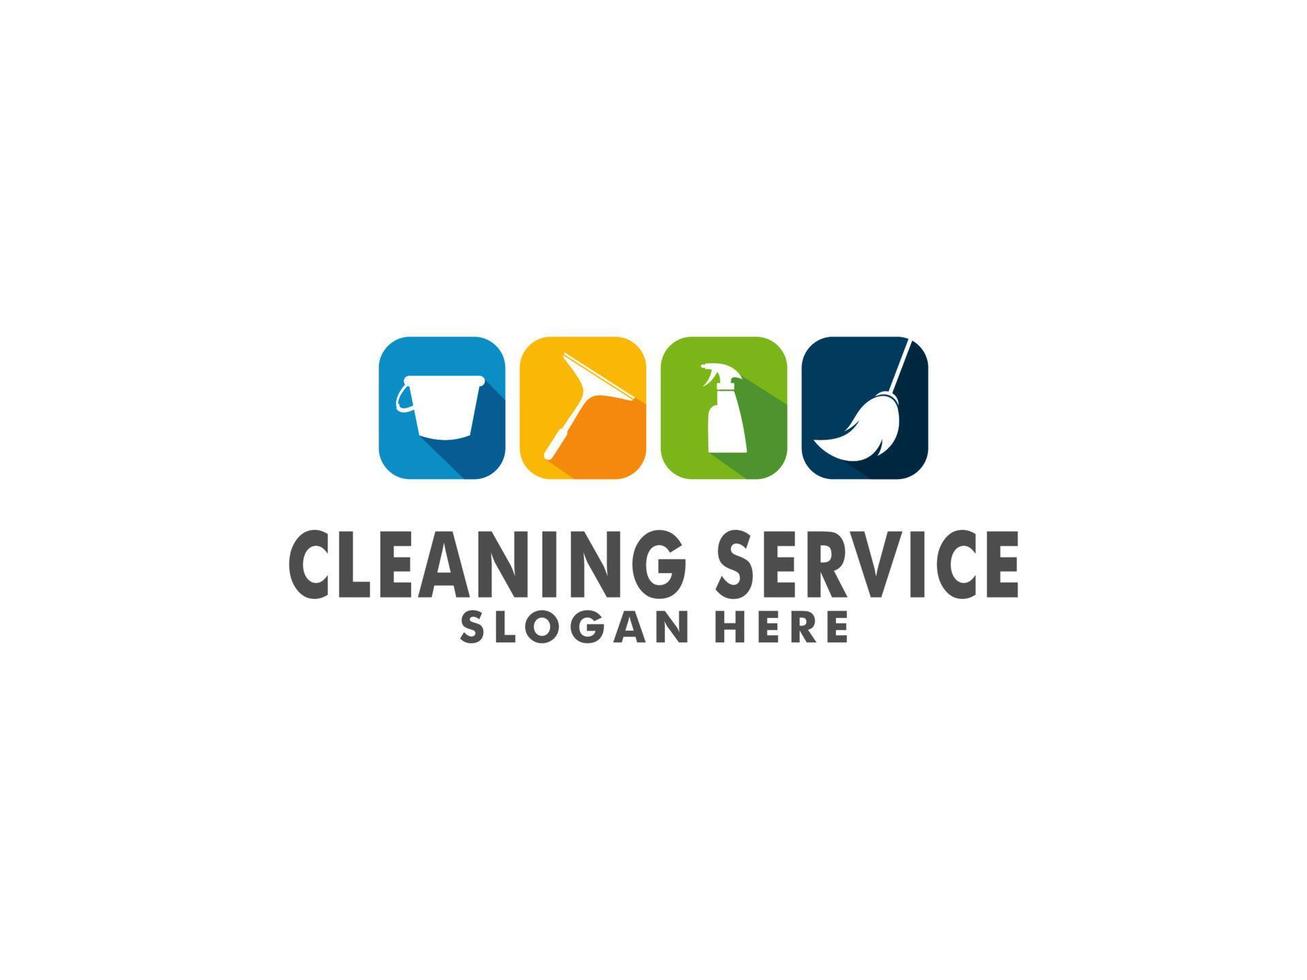 Cleaning for Protections Logo vector Design Inspiration